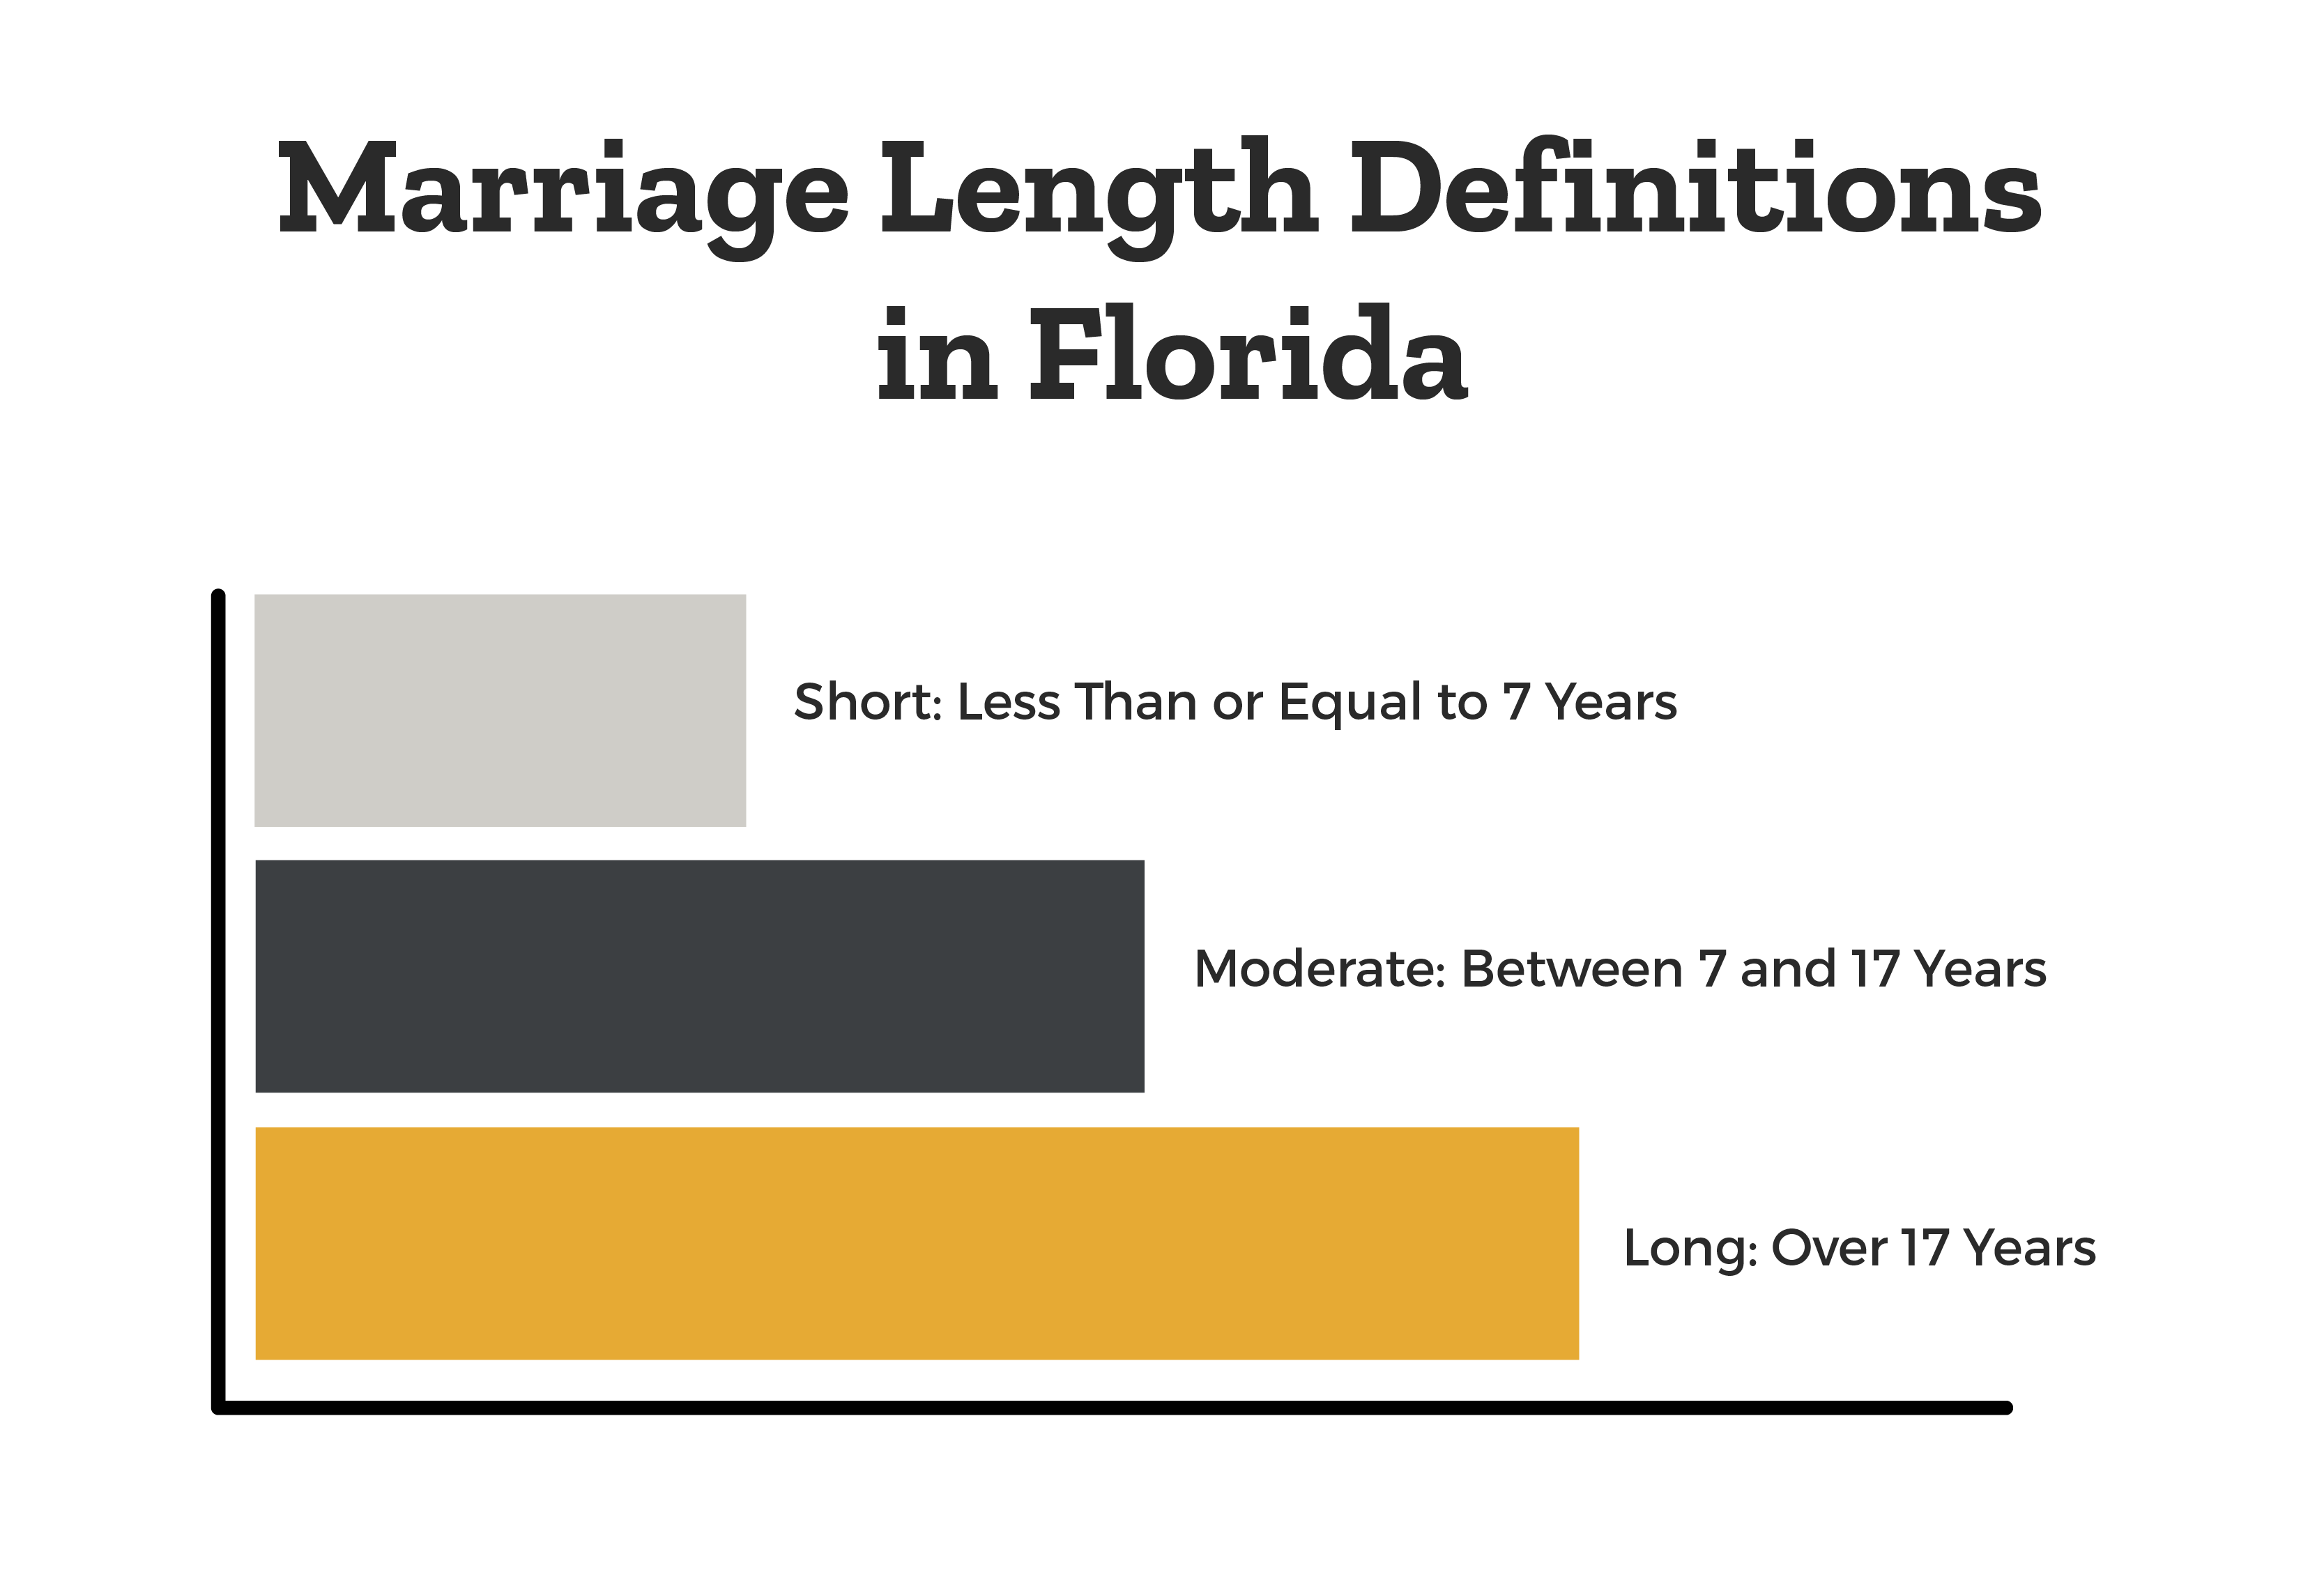 Marriage Length Definitions in Florida